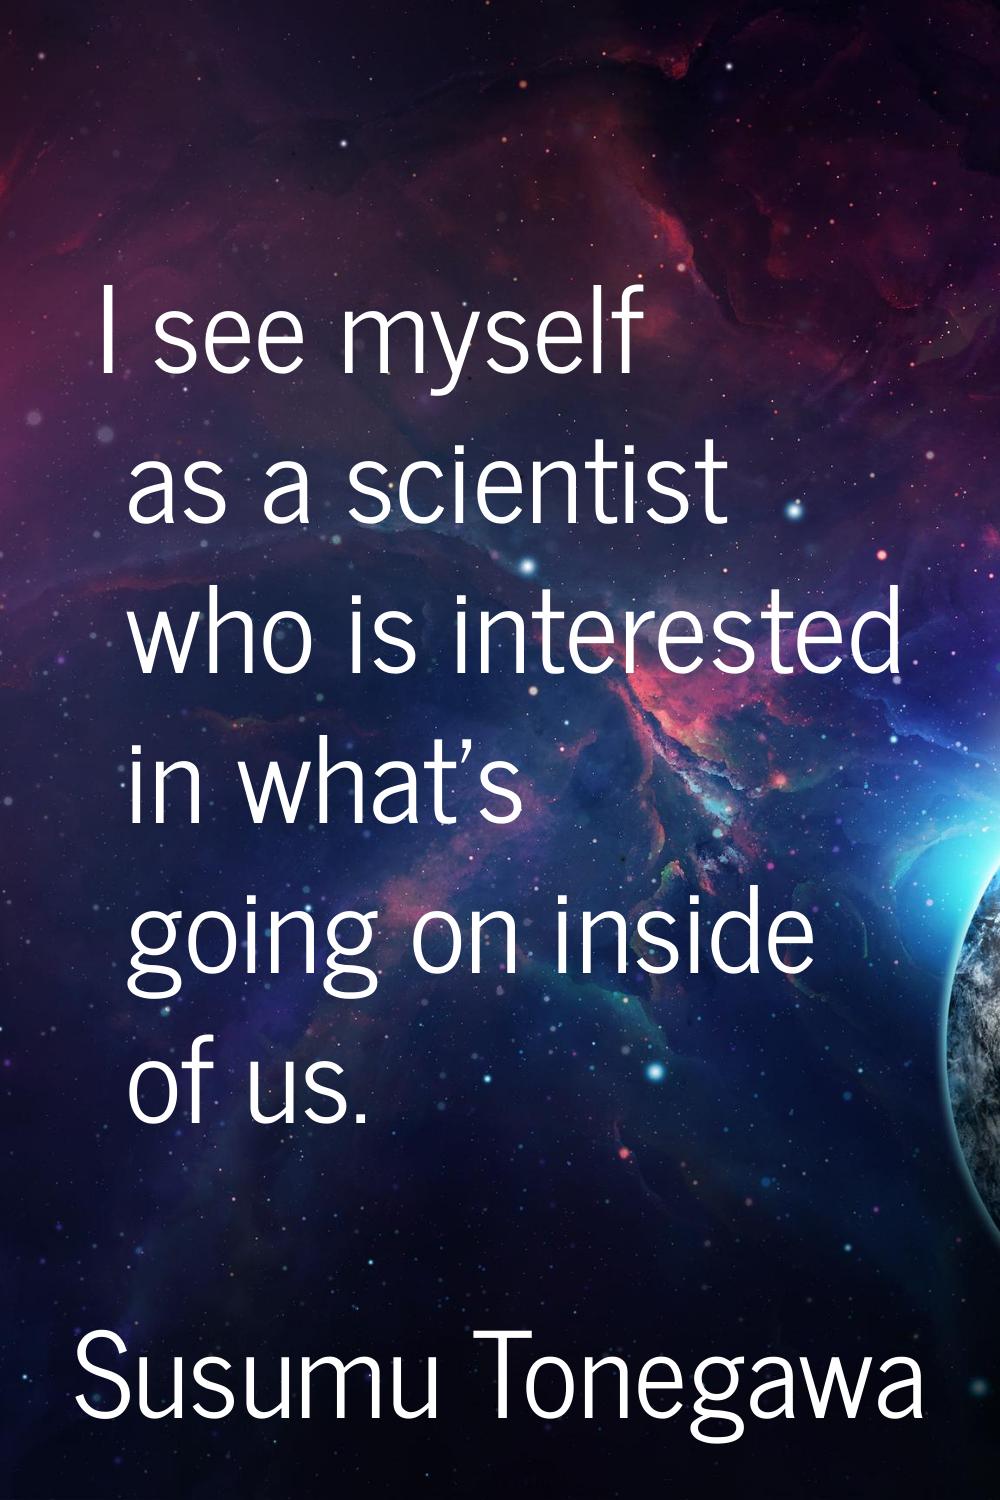 I see myself as a scientist who is interested in what's going on inside of us.